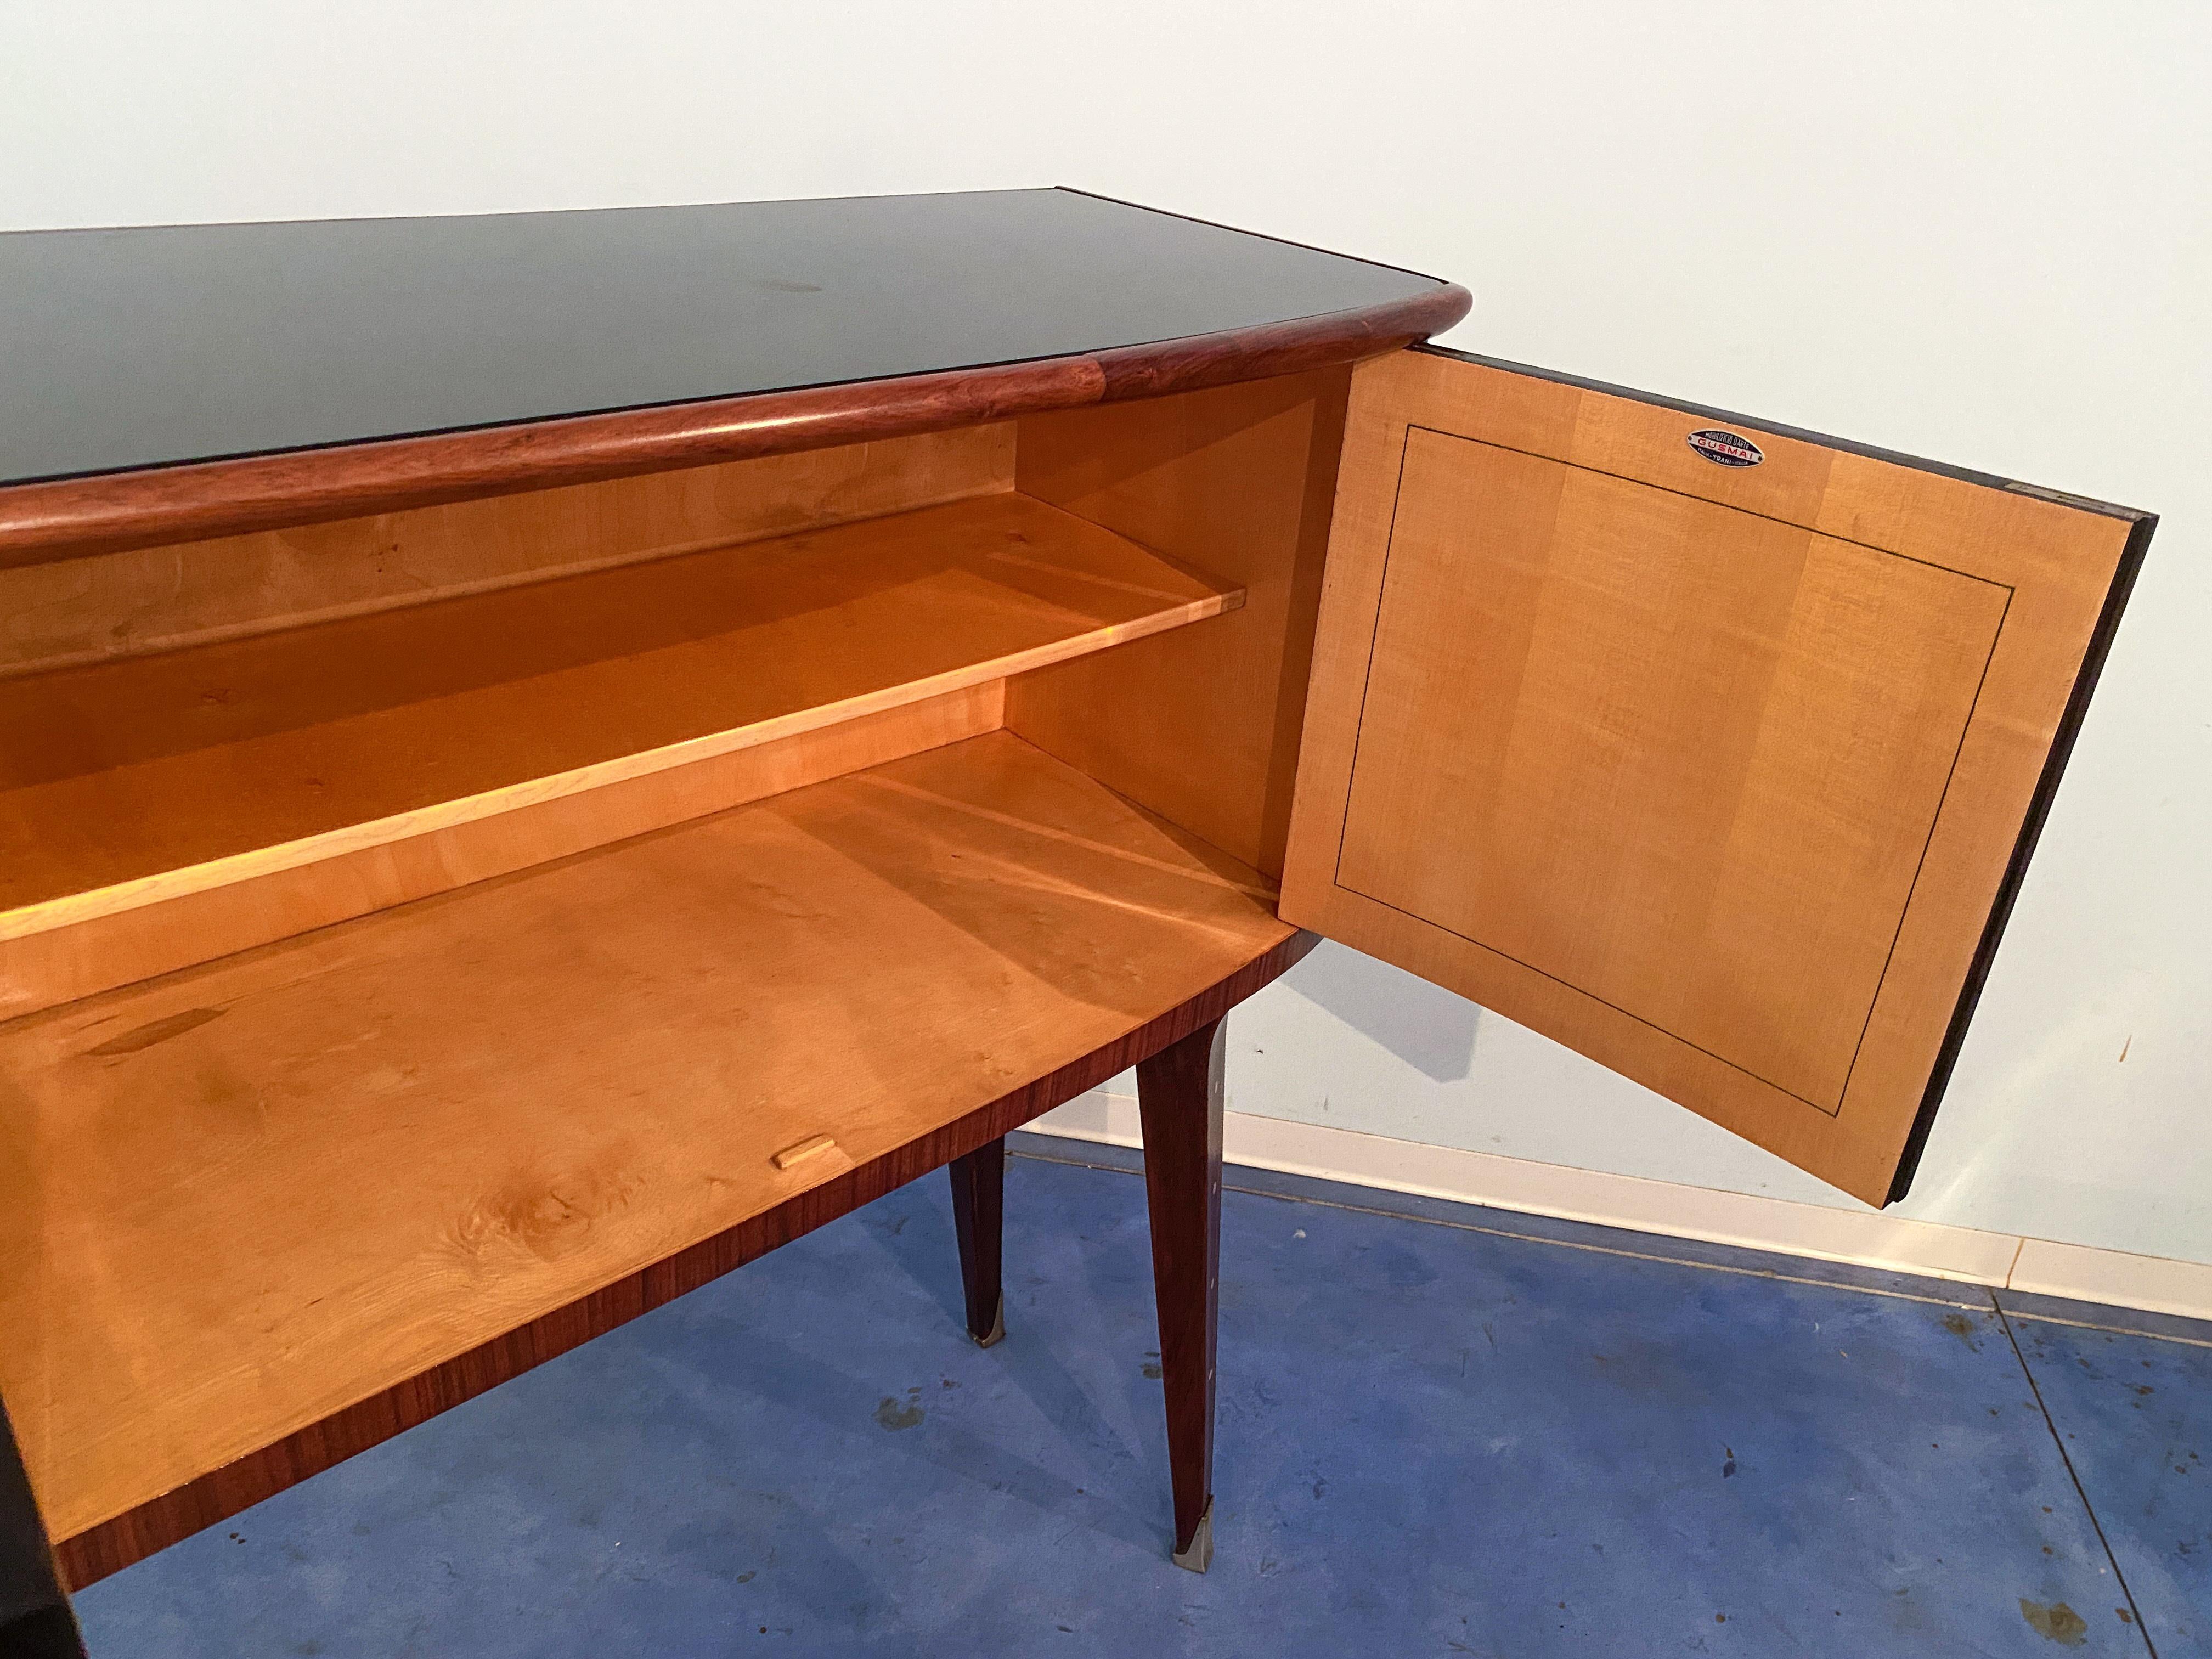 Italian Midcentury Inlaid Maple Sideboard by Andrea Gusmai, 1950s For Sale 2